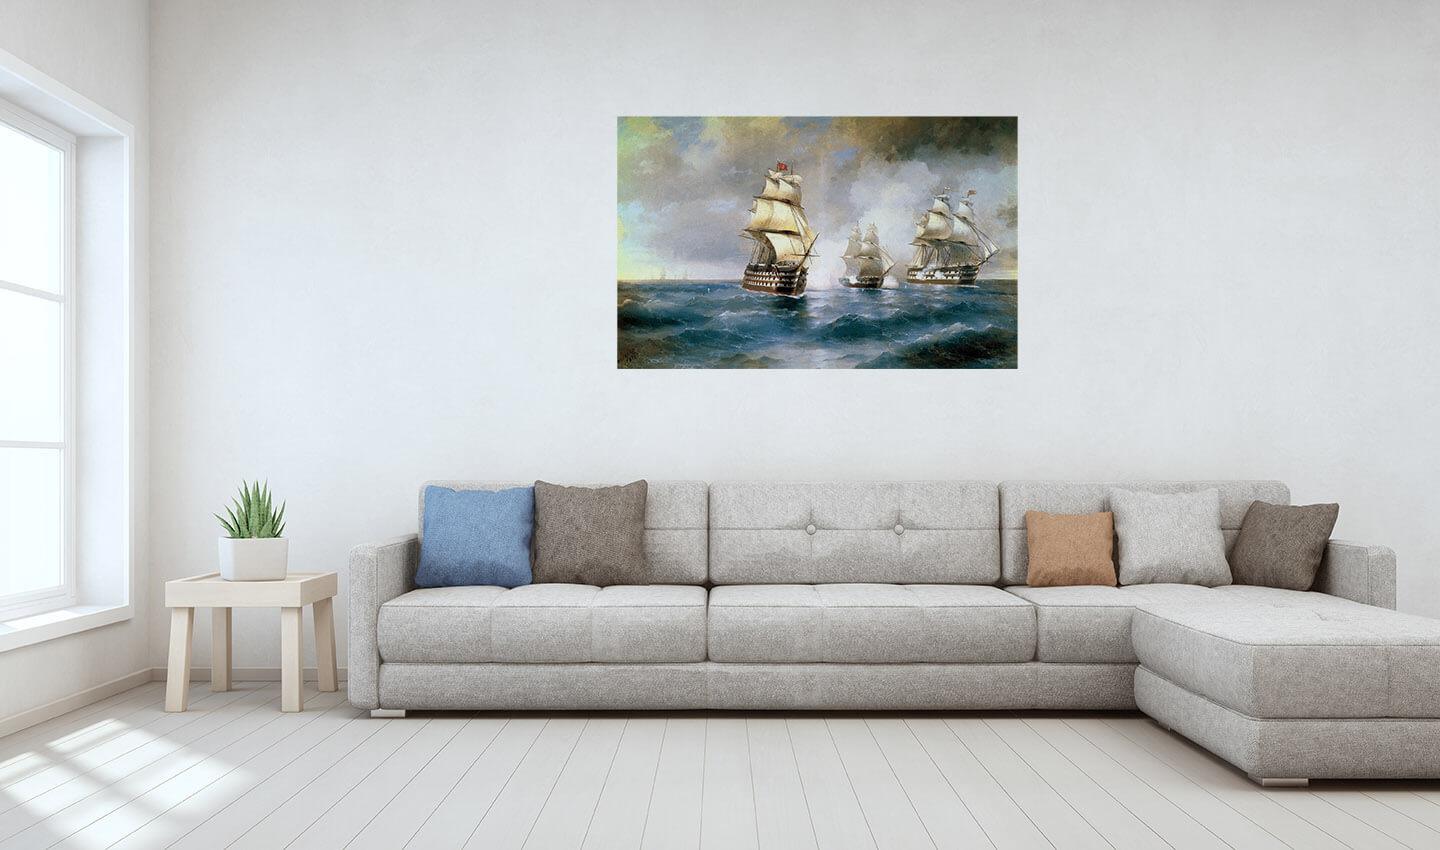 Picture Ivan Aivazovsky - Brig "Mercury", attacked by two Turkish ships 3